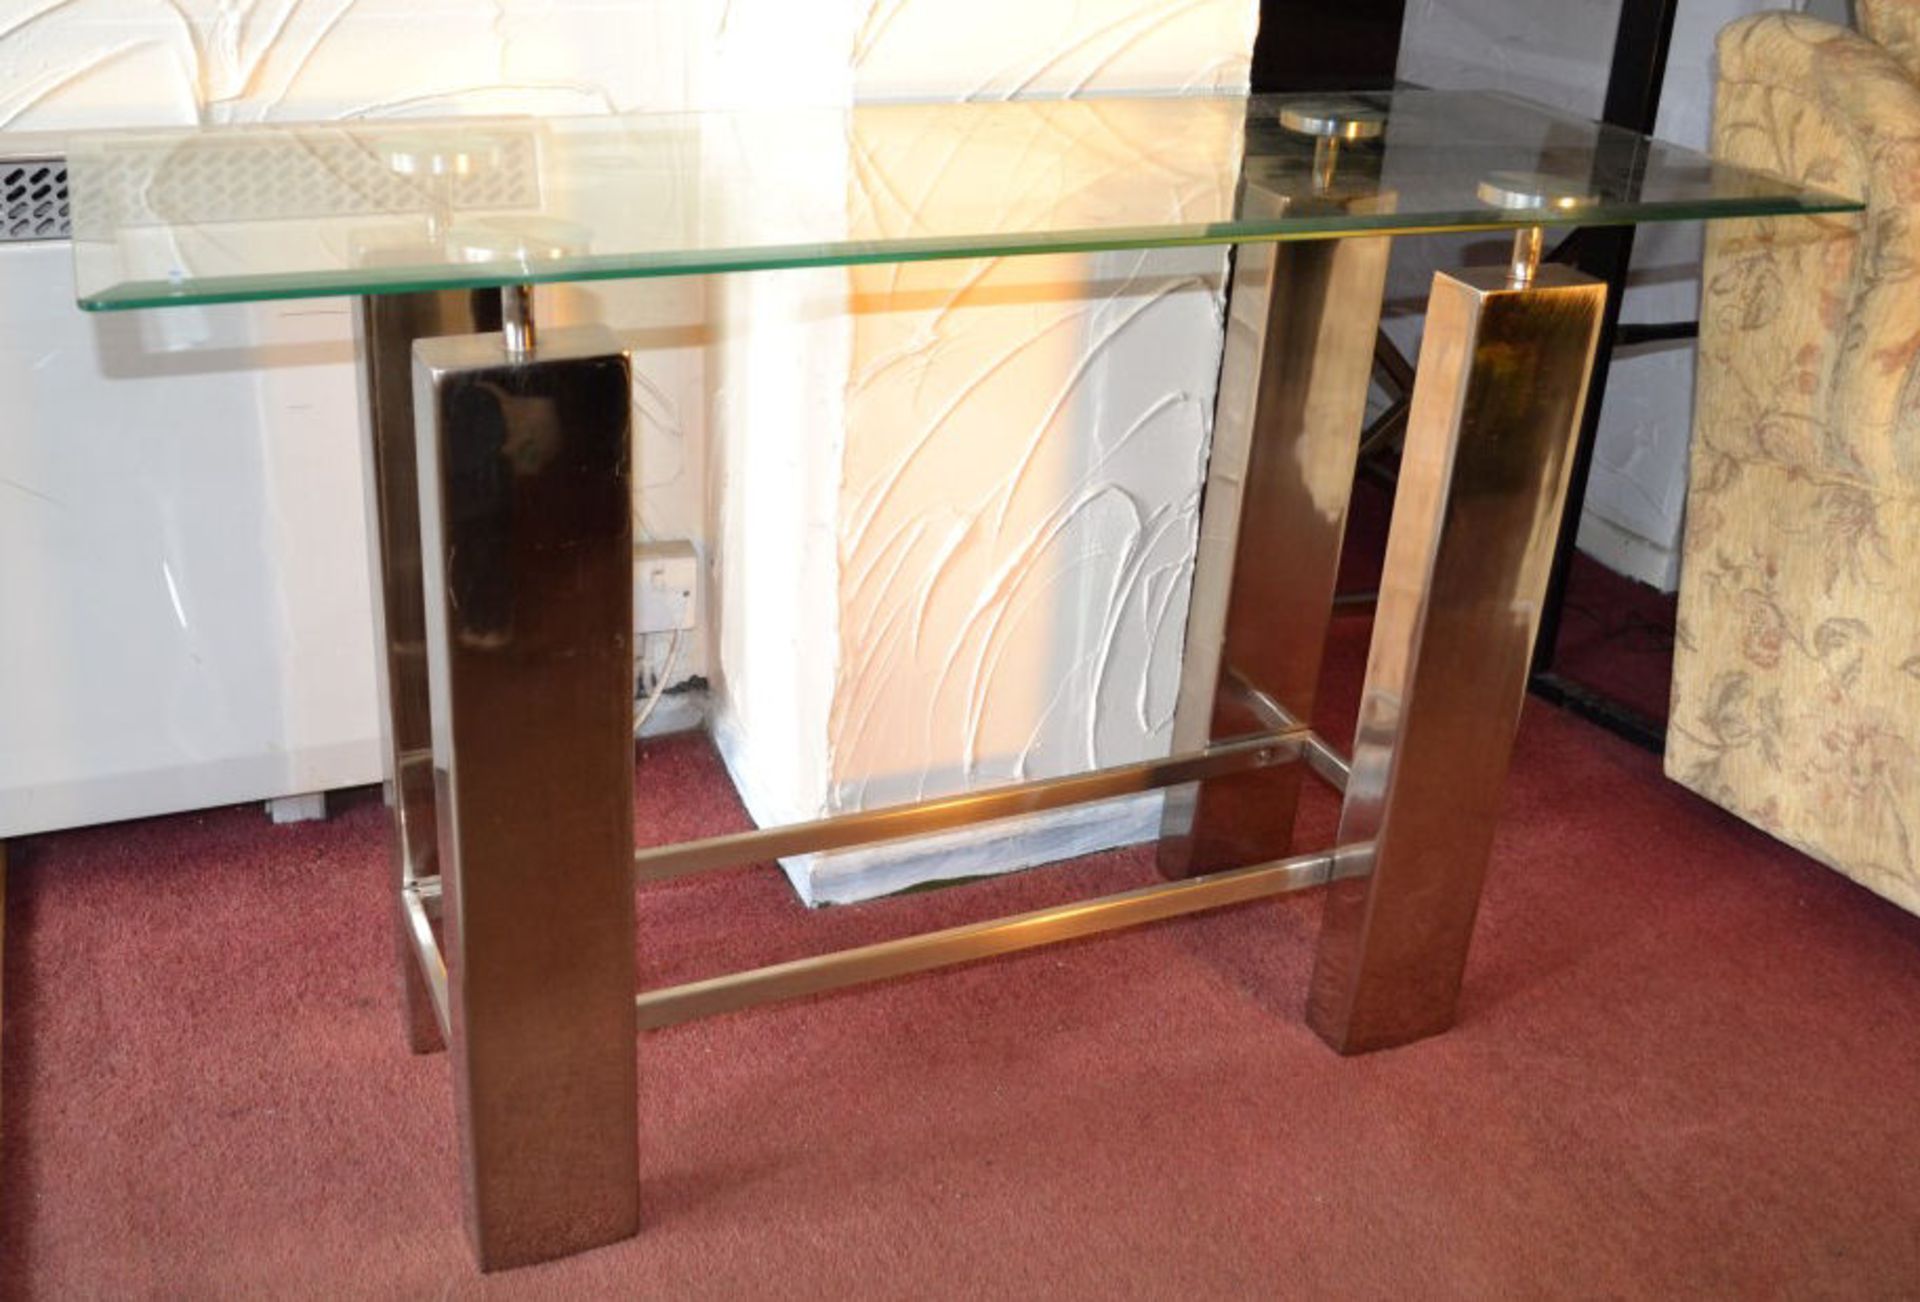 1 x Contemporary Glass Top Console Table With Silver Metal Legs - CL108 - Image 2 of 5